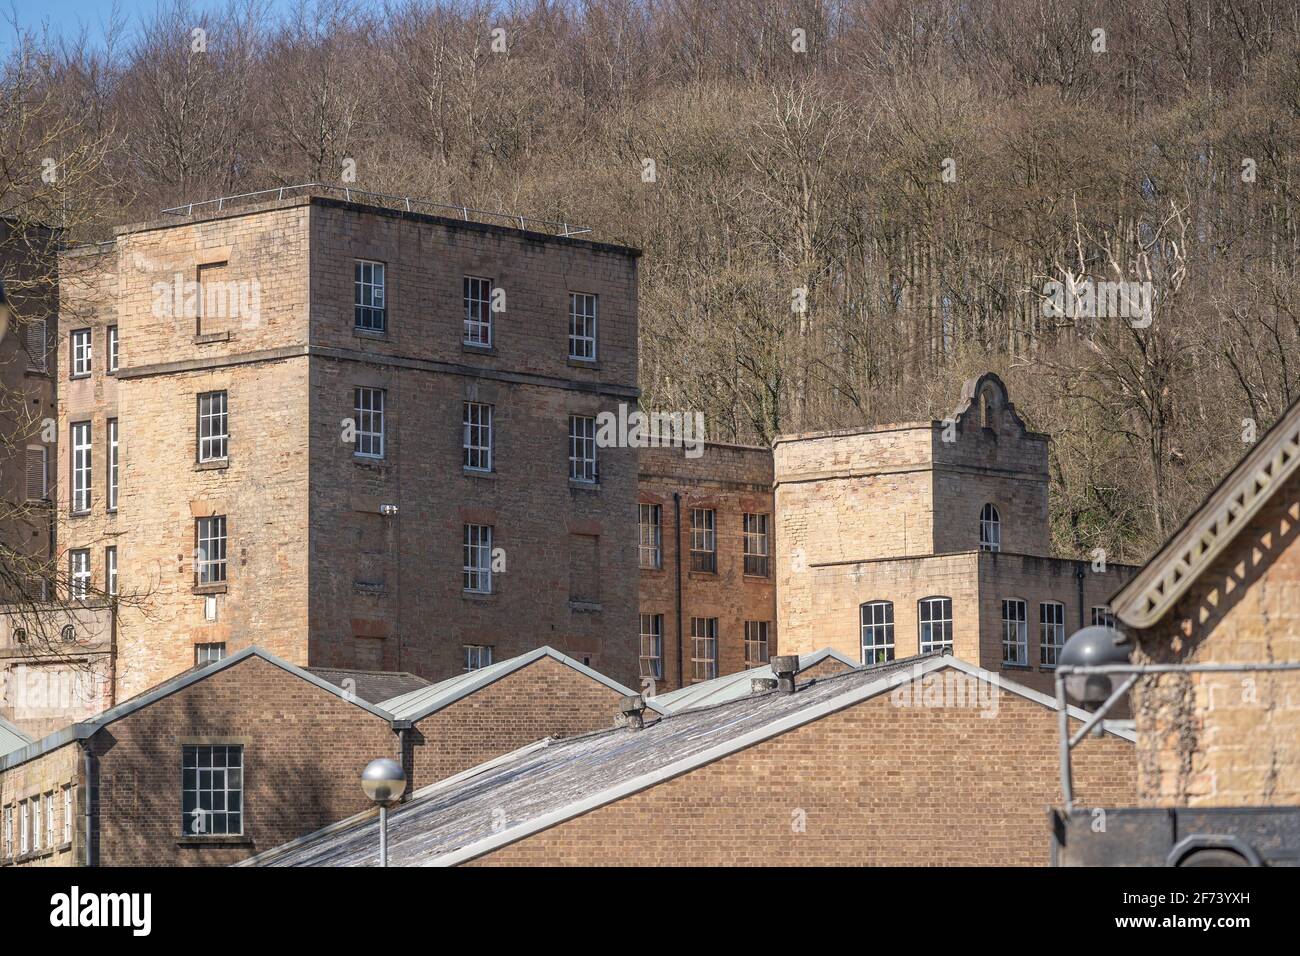 Abandoned old 1800's industrial revolution cotton mill exterior. Tall stone victorian heritage buildings with windows. Stock Photo